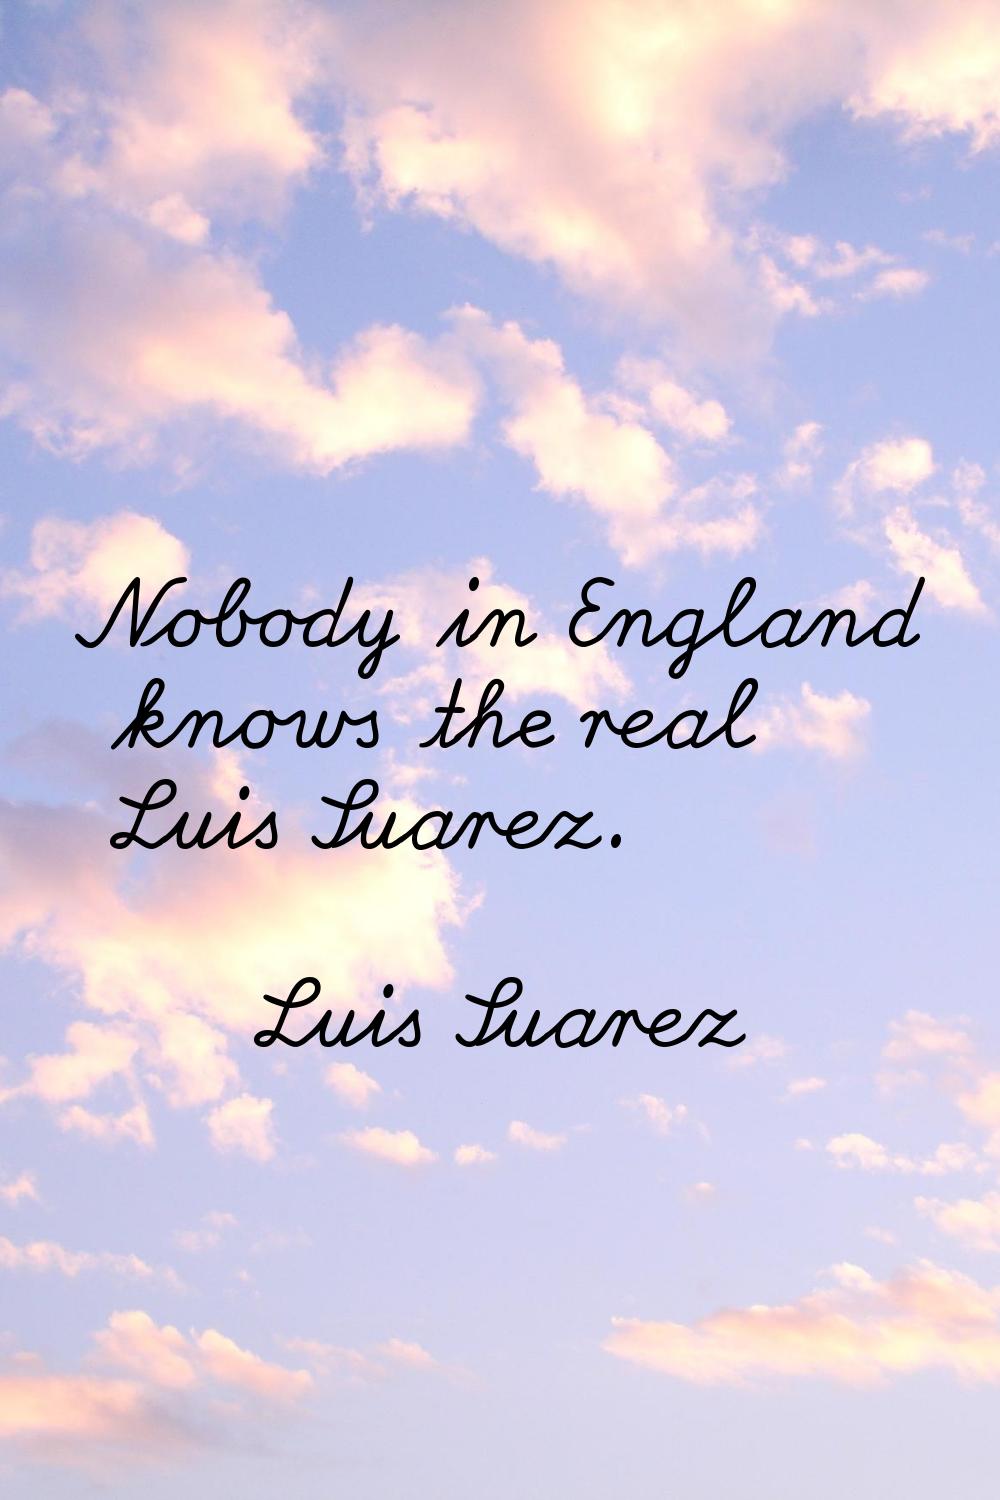 Nobody in England knows the real Luis Suarez.